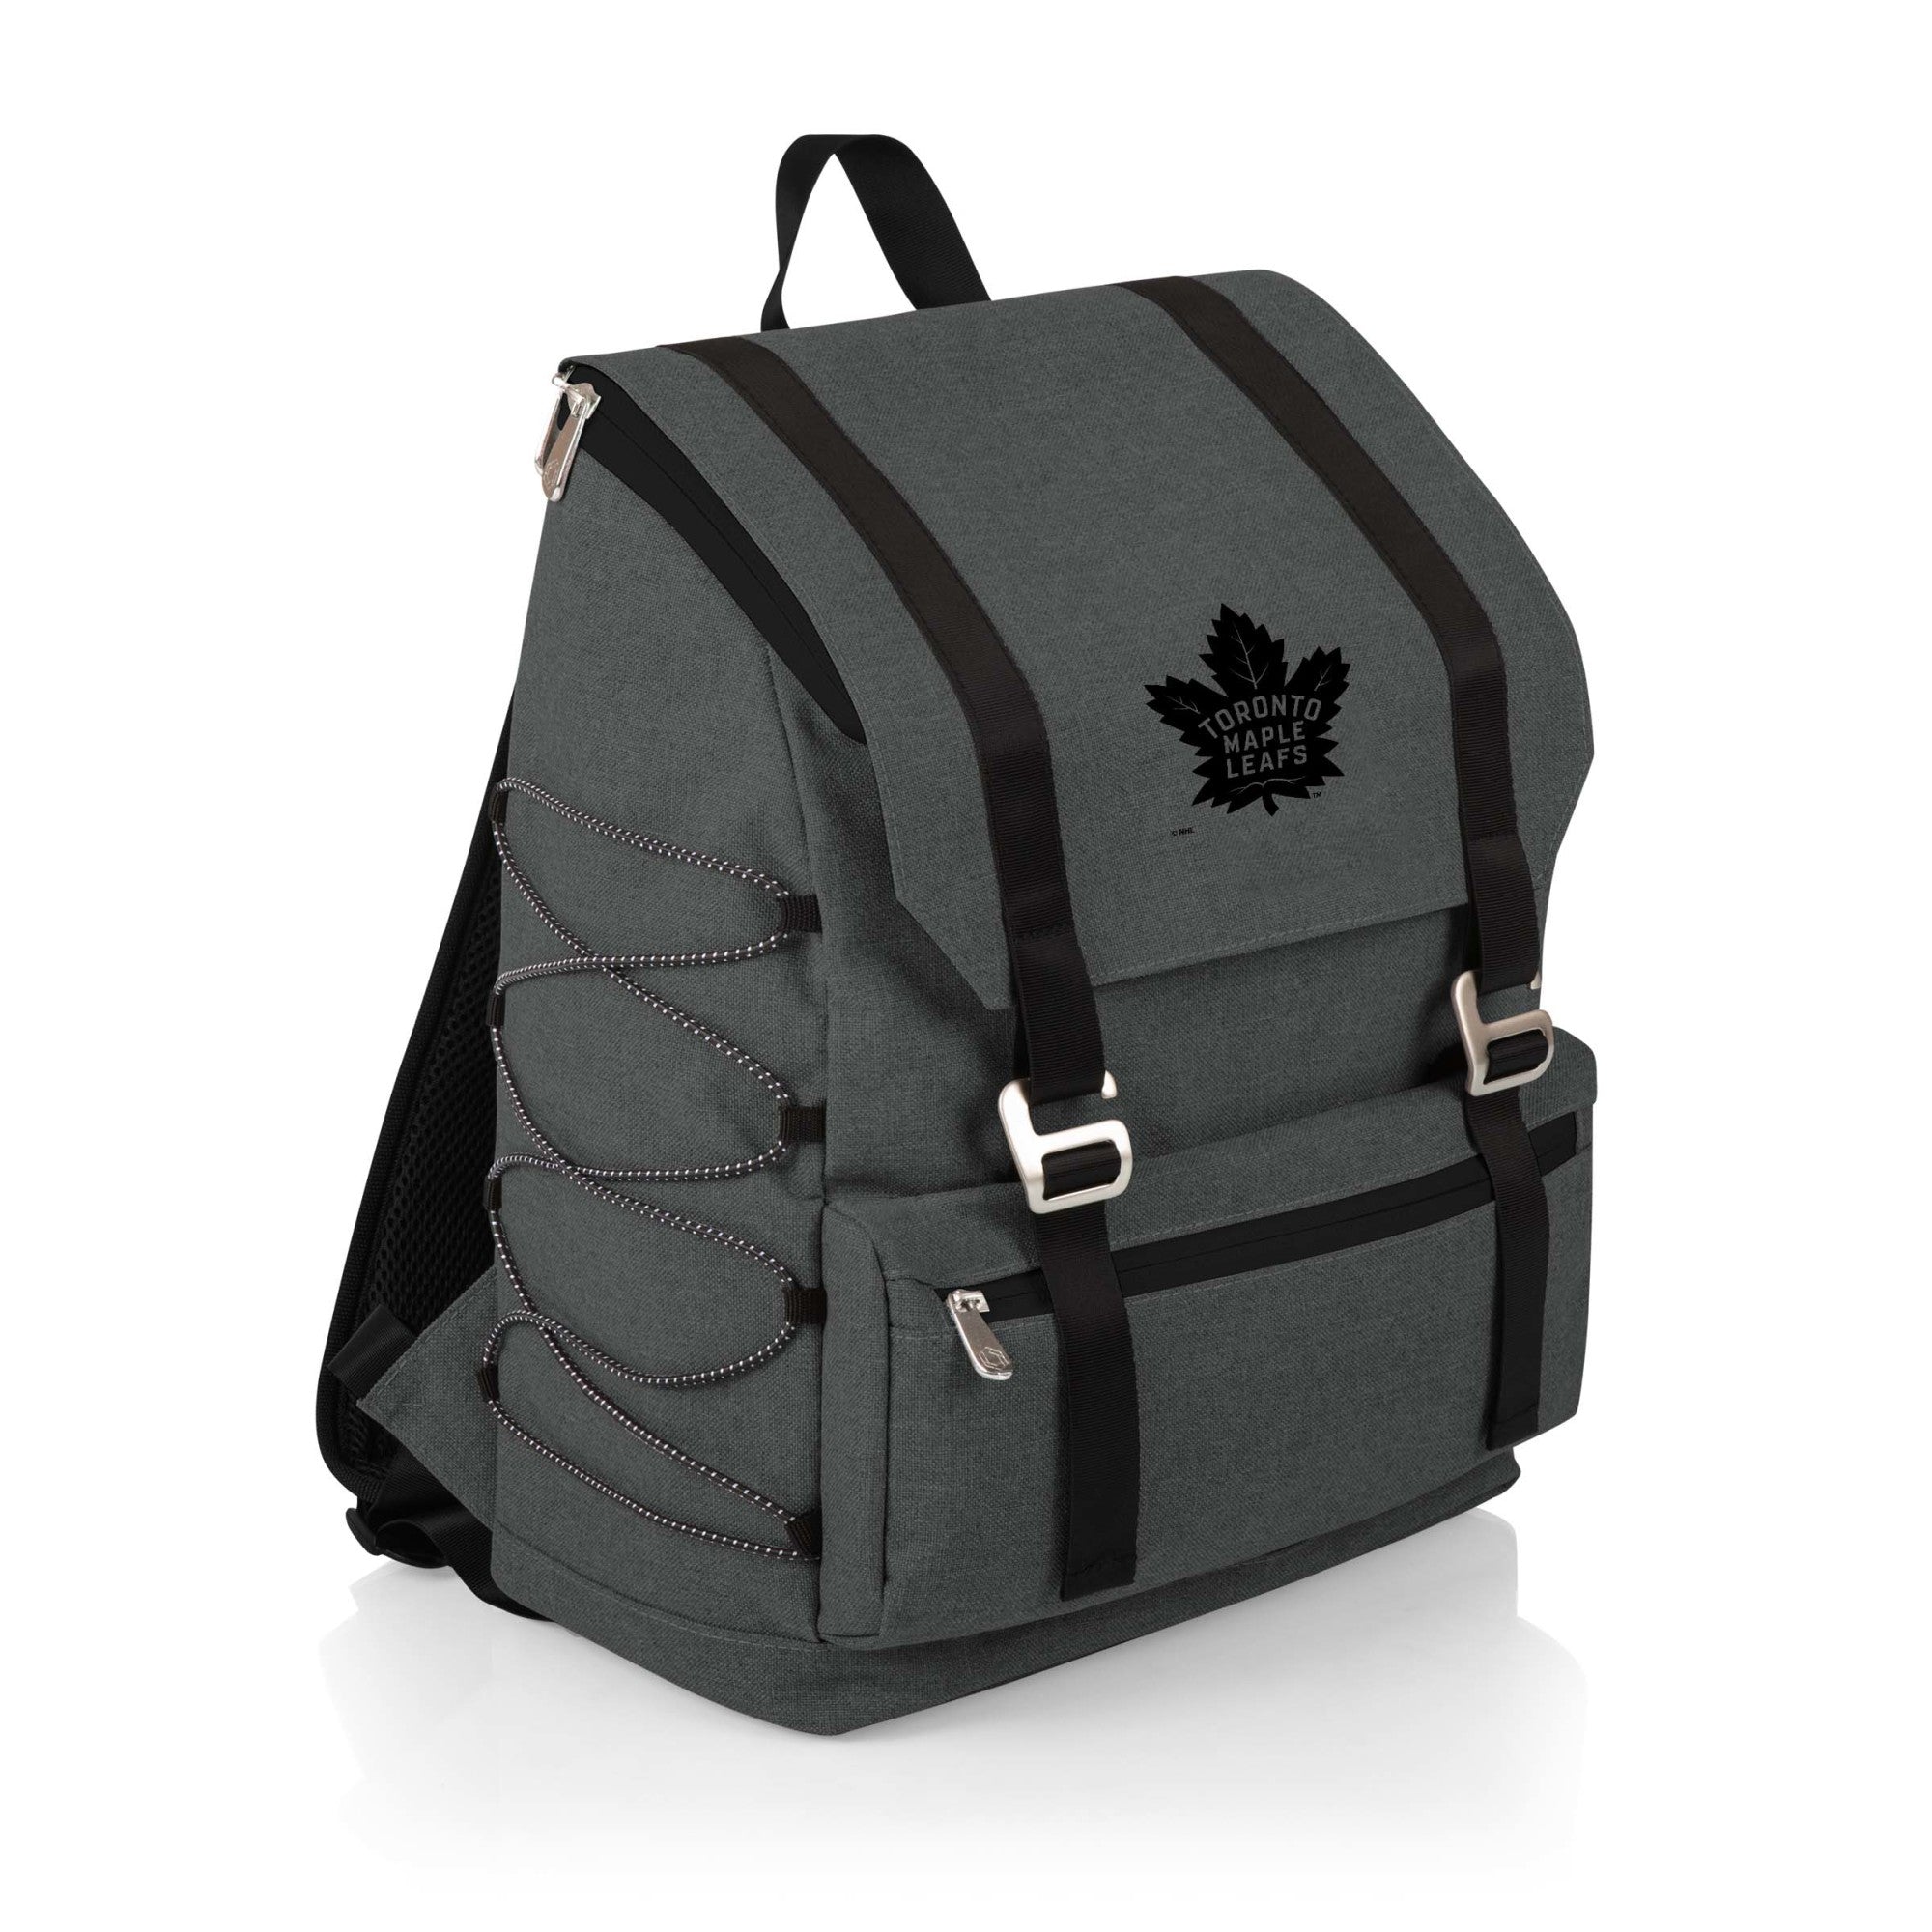 Toronto Maple Leafs - On The Go Traverse Backpack Cooler